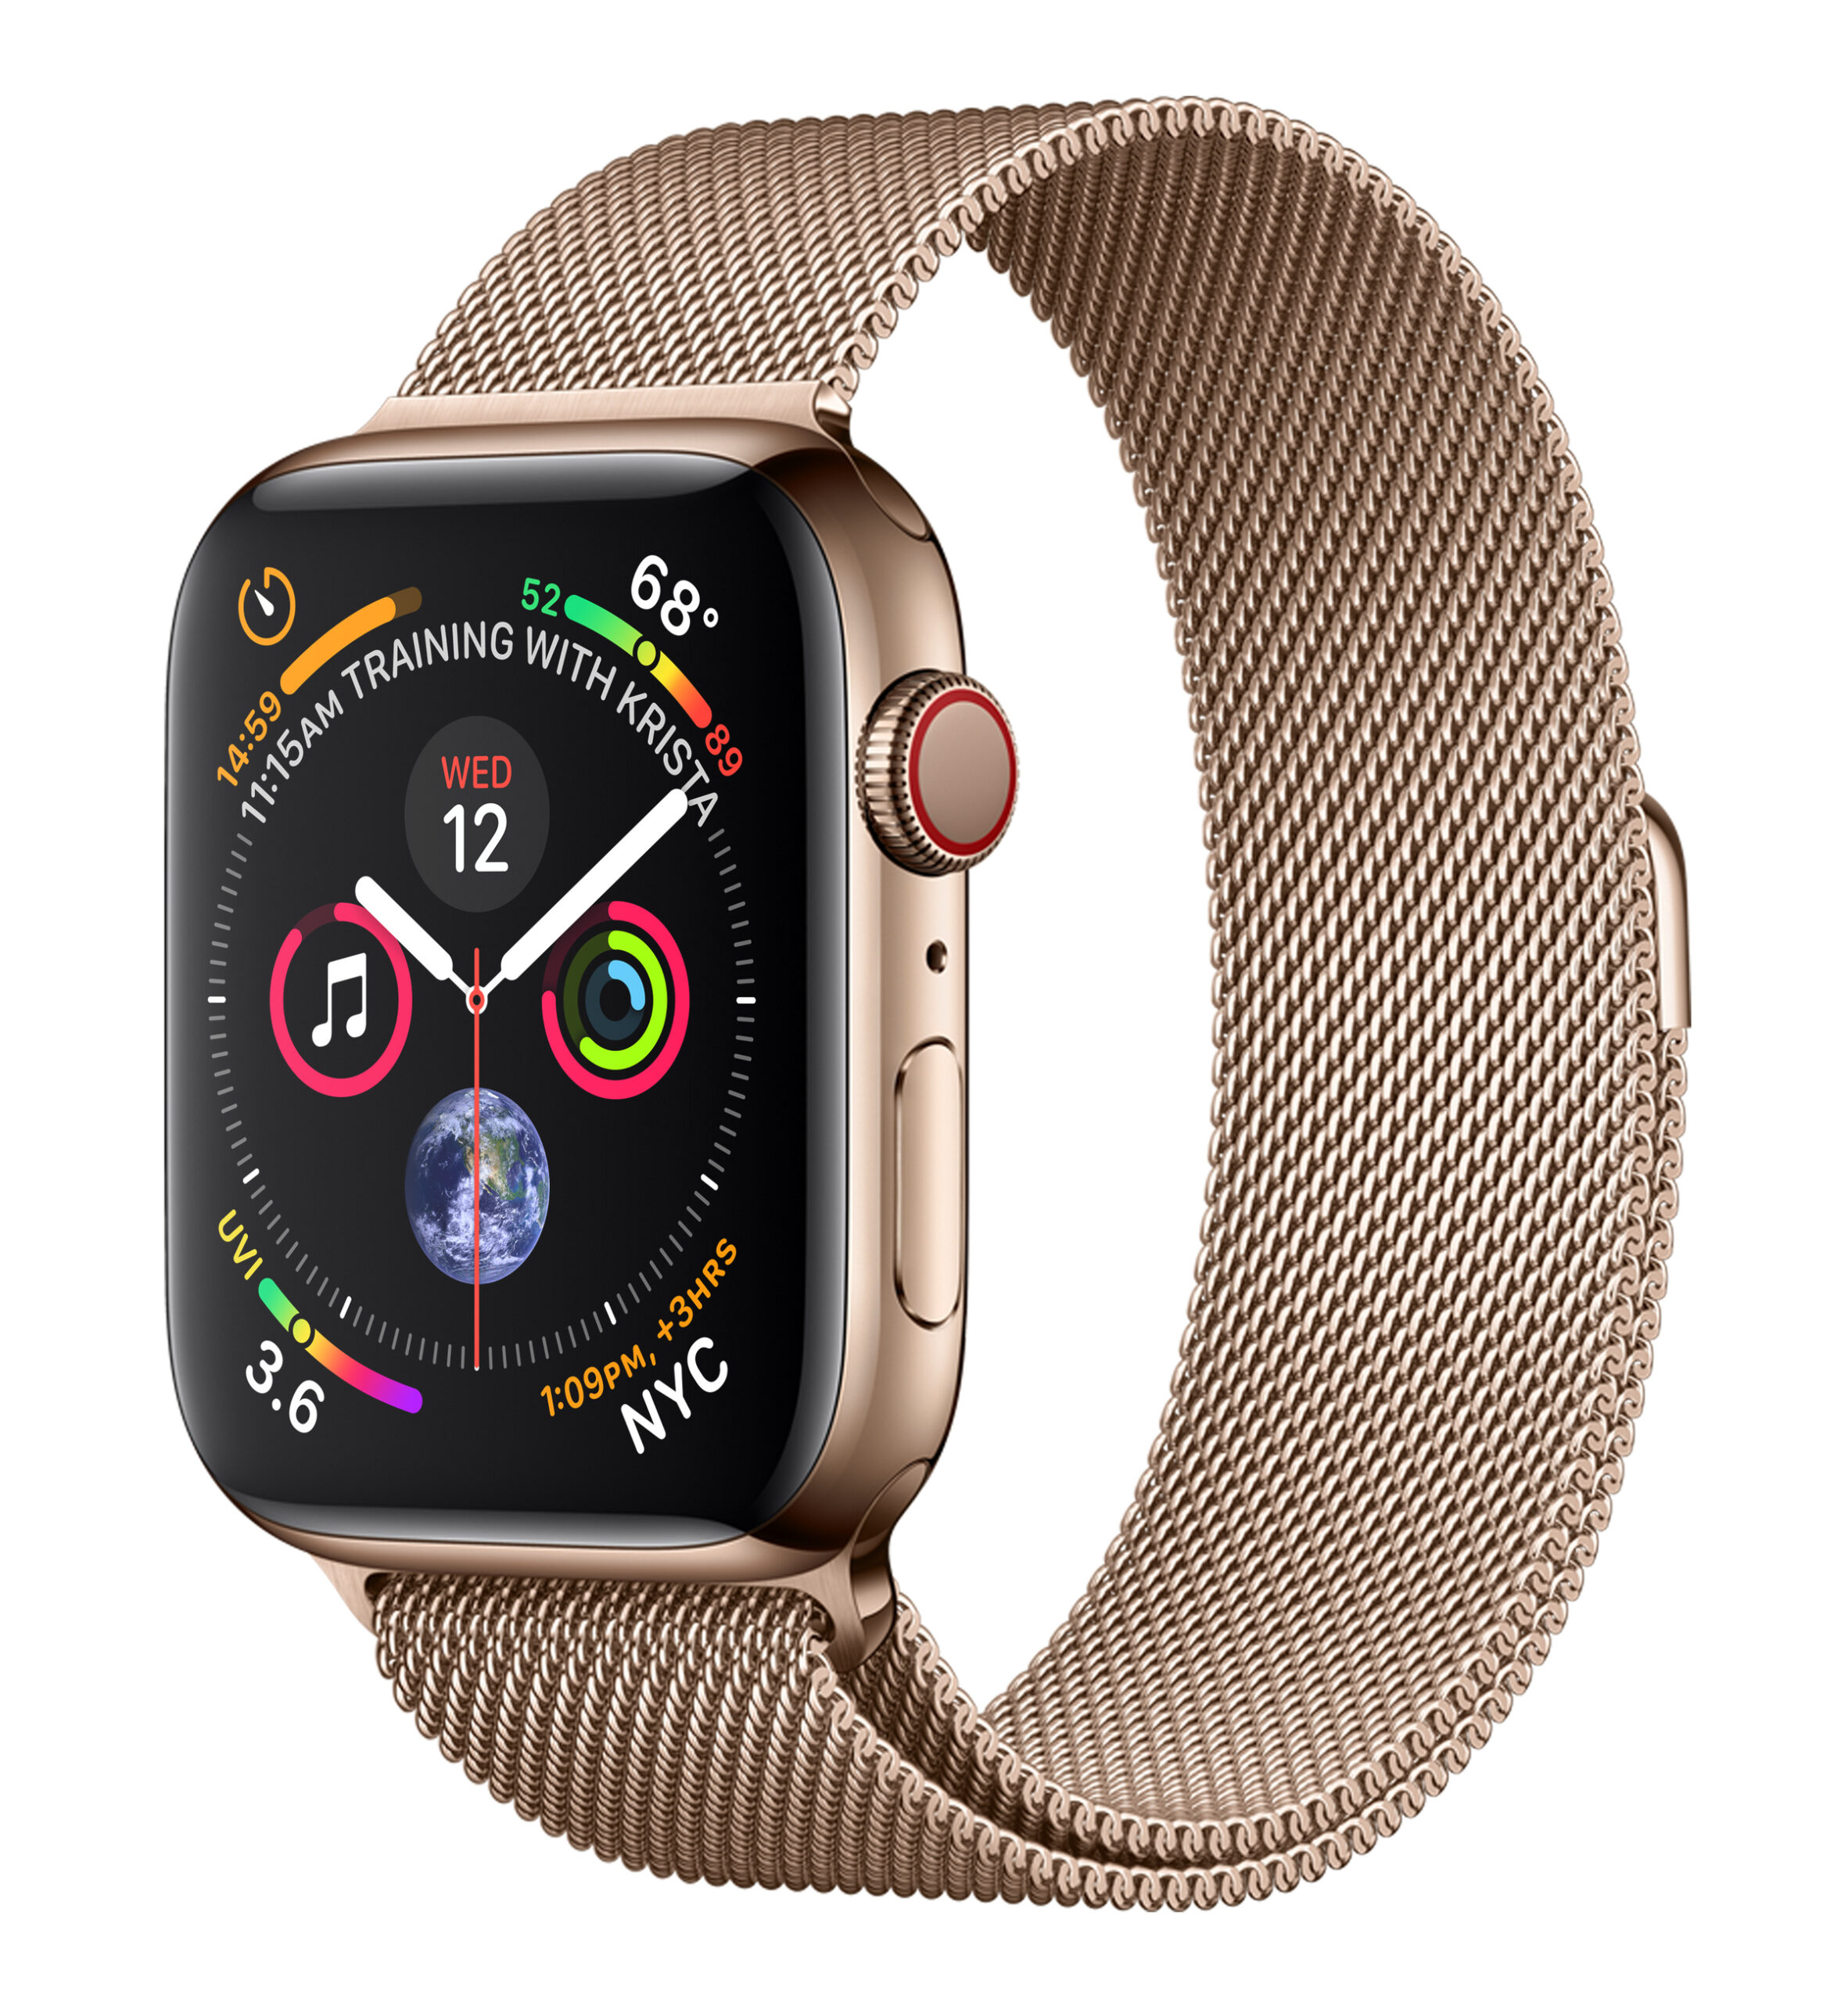 MTV82LL/A | $344 | Apple Watch Series 4 (GPS + Cellular, 44mm, Gold Stainless Steel Gold Apple Watch